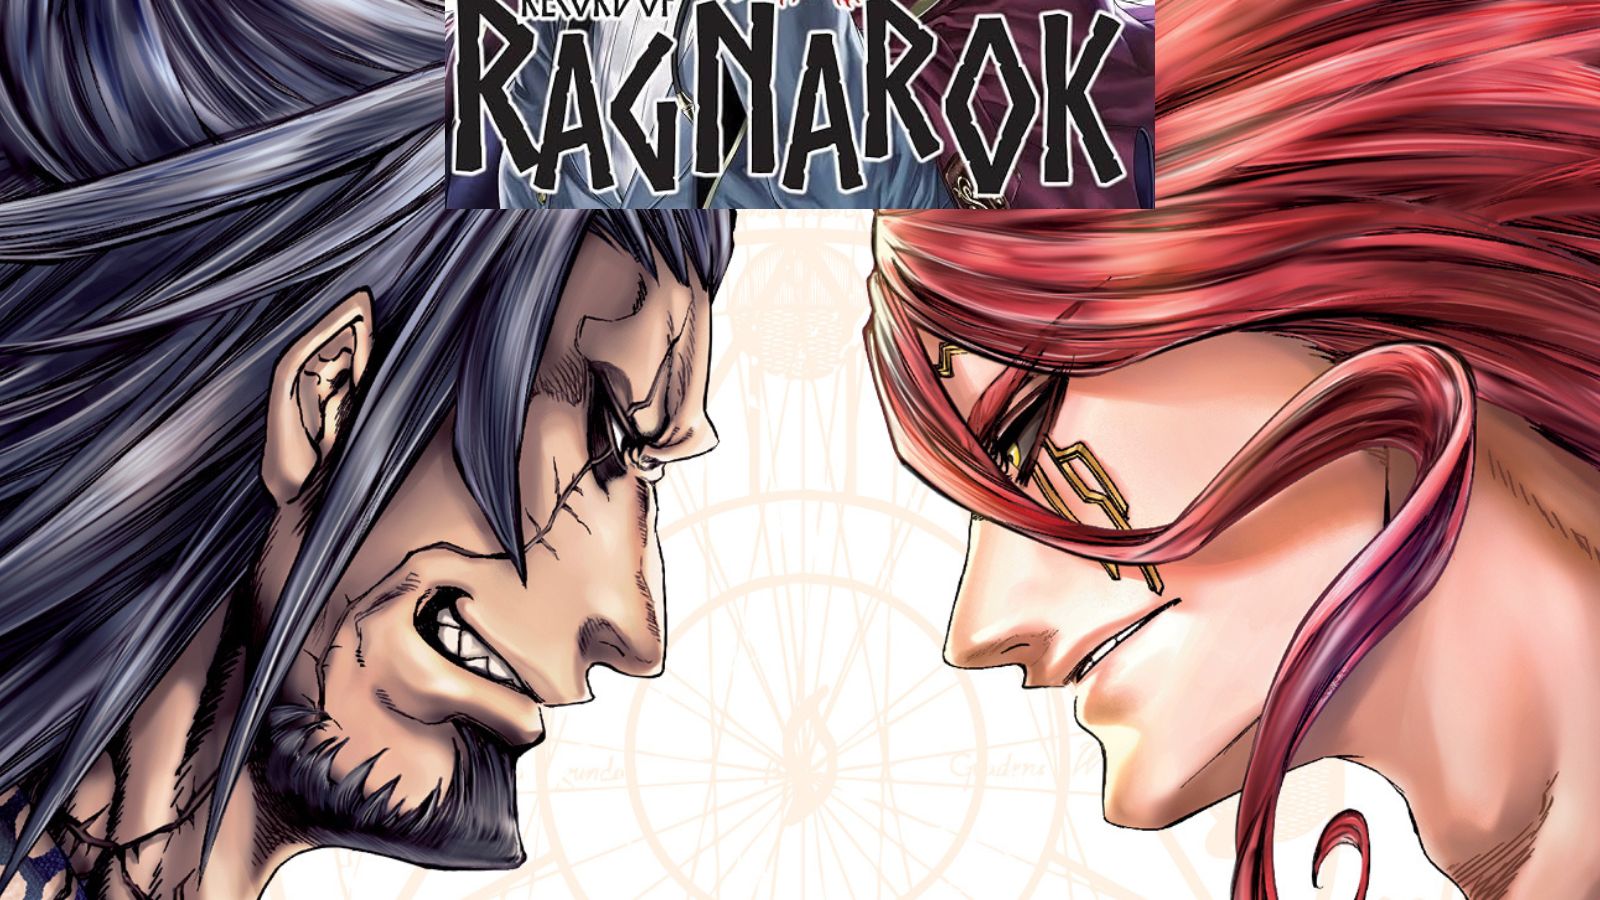 Record of Ragnarok Chapter 84 Release Date